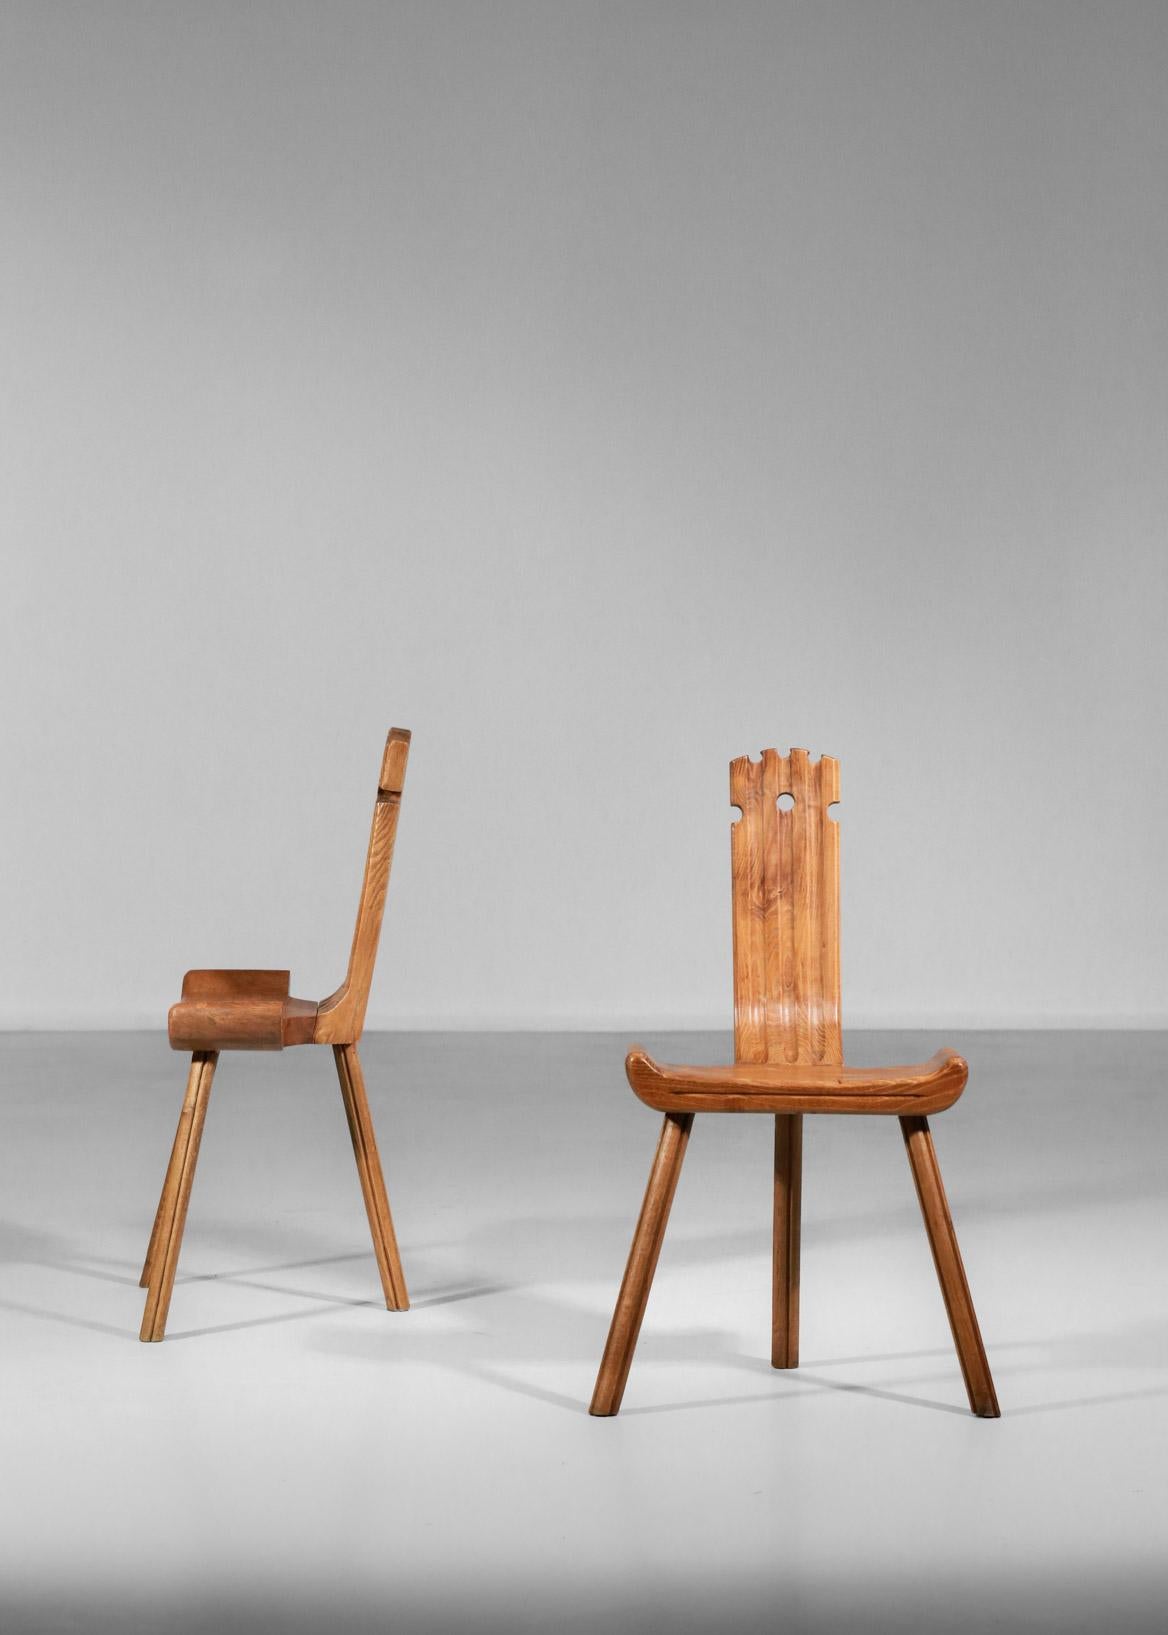 Hand-Crafted French Tripod Chairs from the 1960s Oak Rustic Style of Charlotte Perriand, Pair